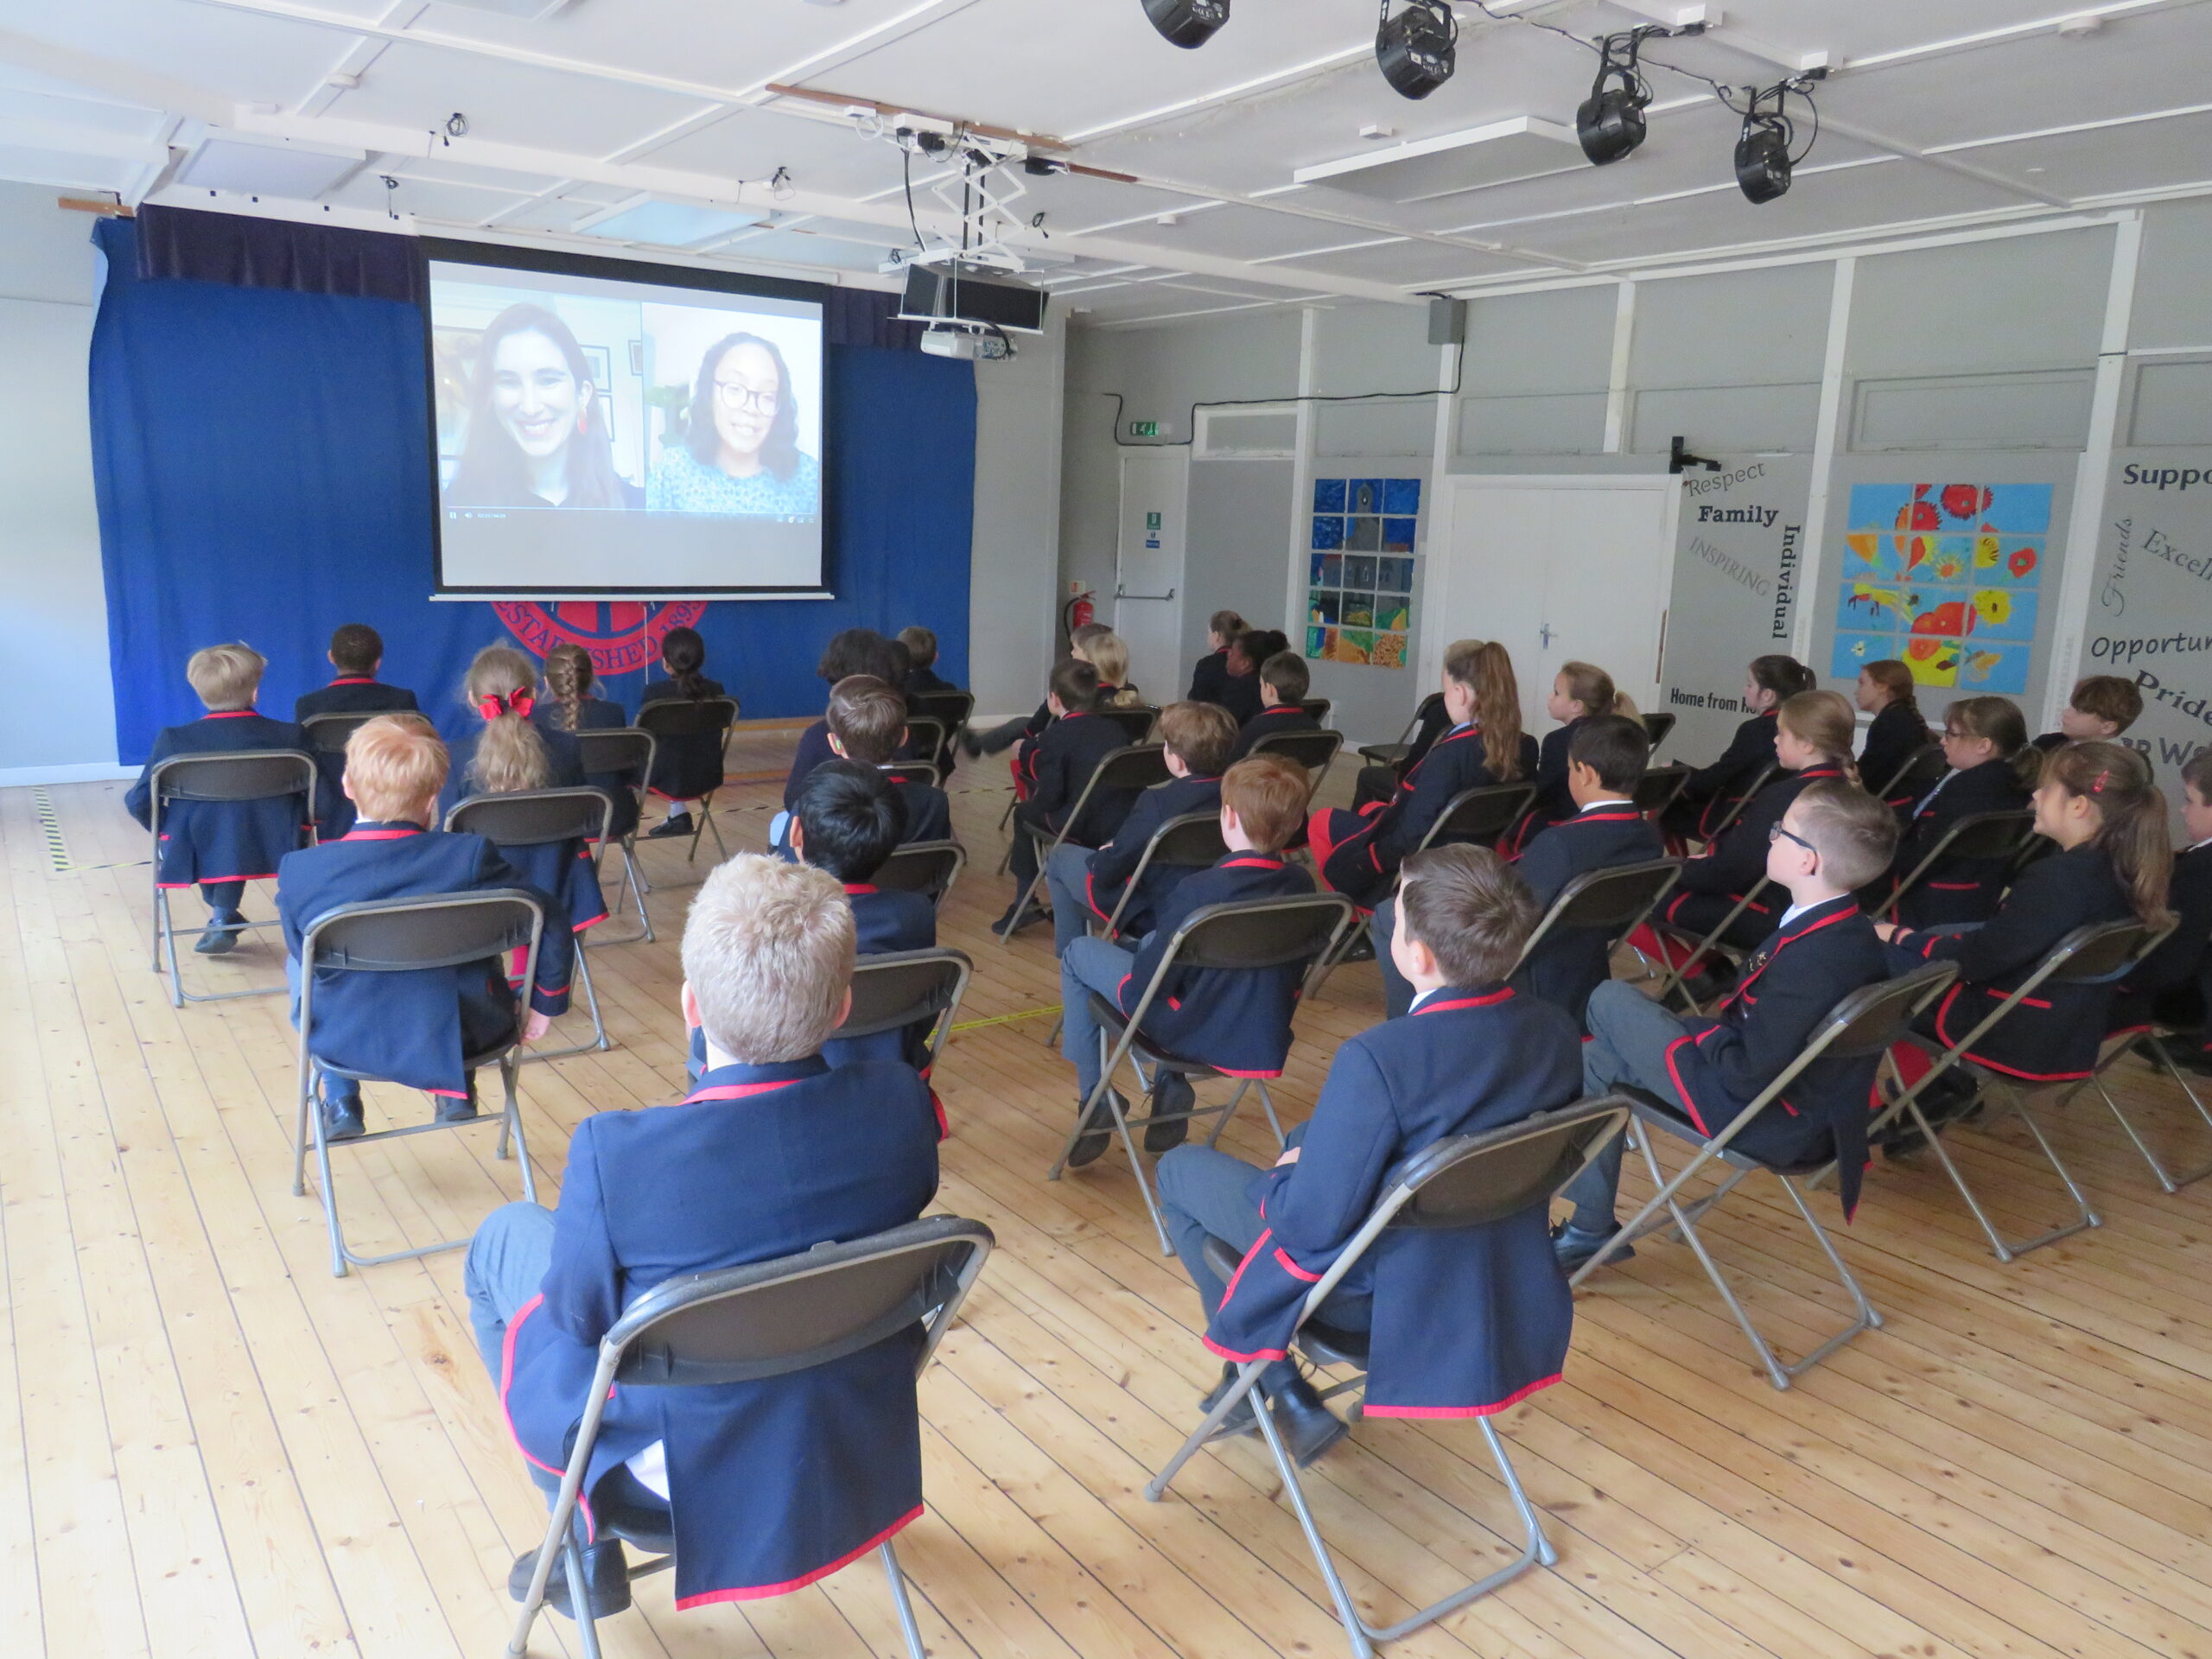 Year 5 & Year 6 listening attentively to Katherine Rundell